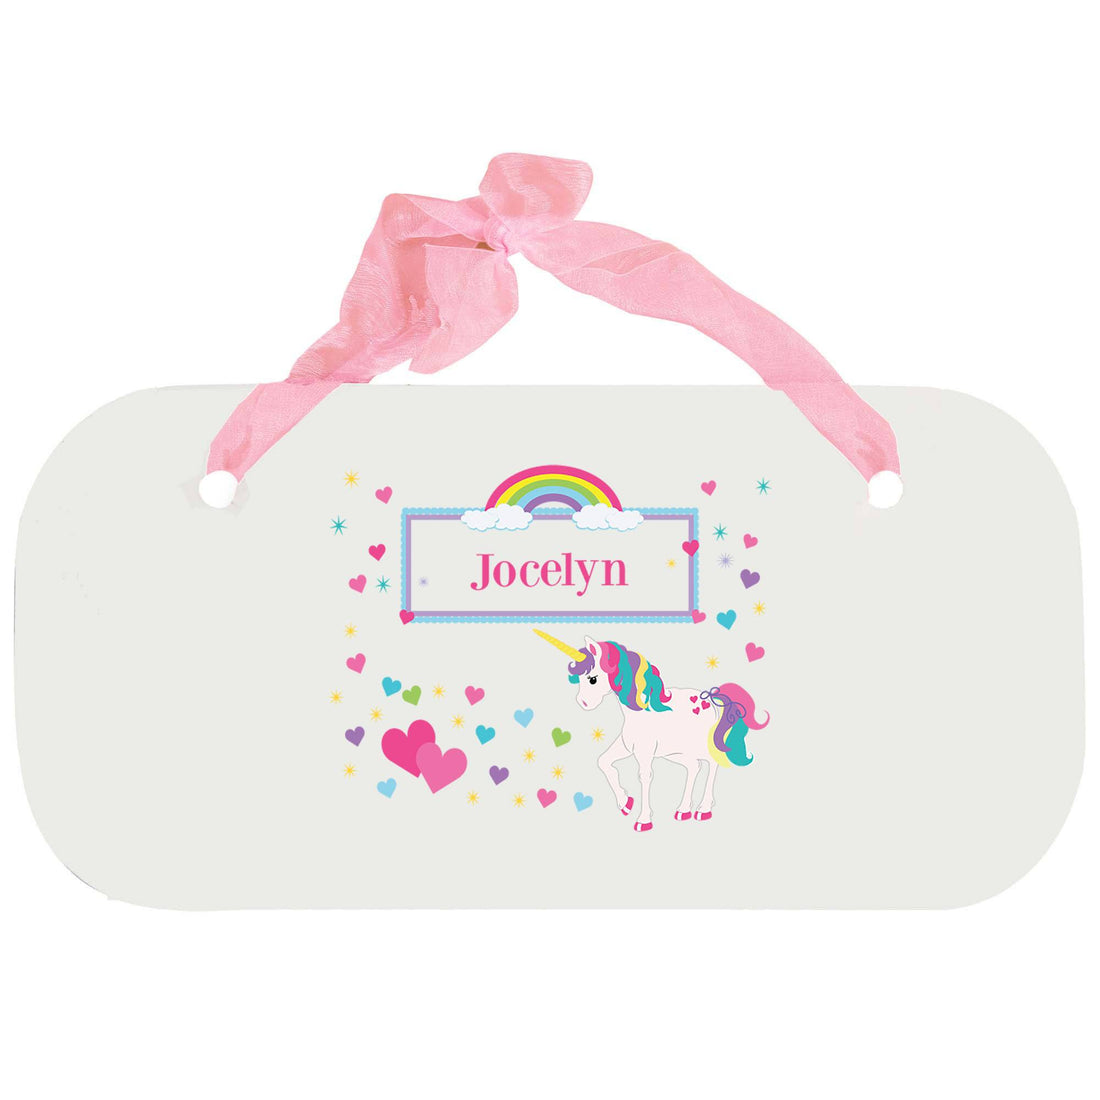 Personalized Girls Wall Plaque with Unicorn design